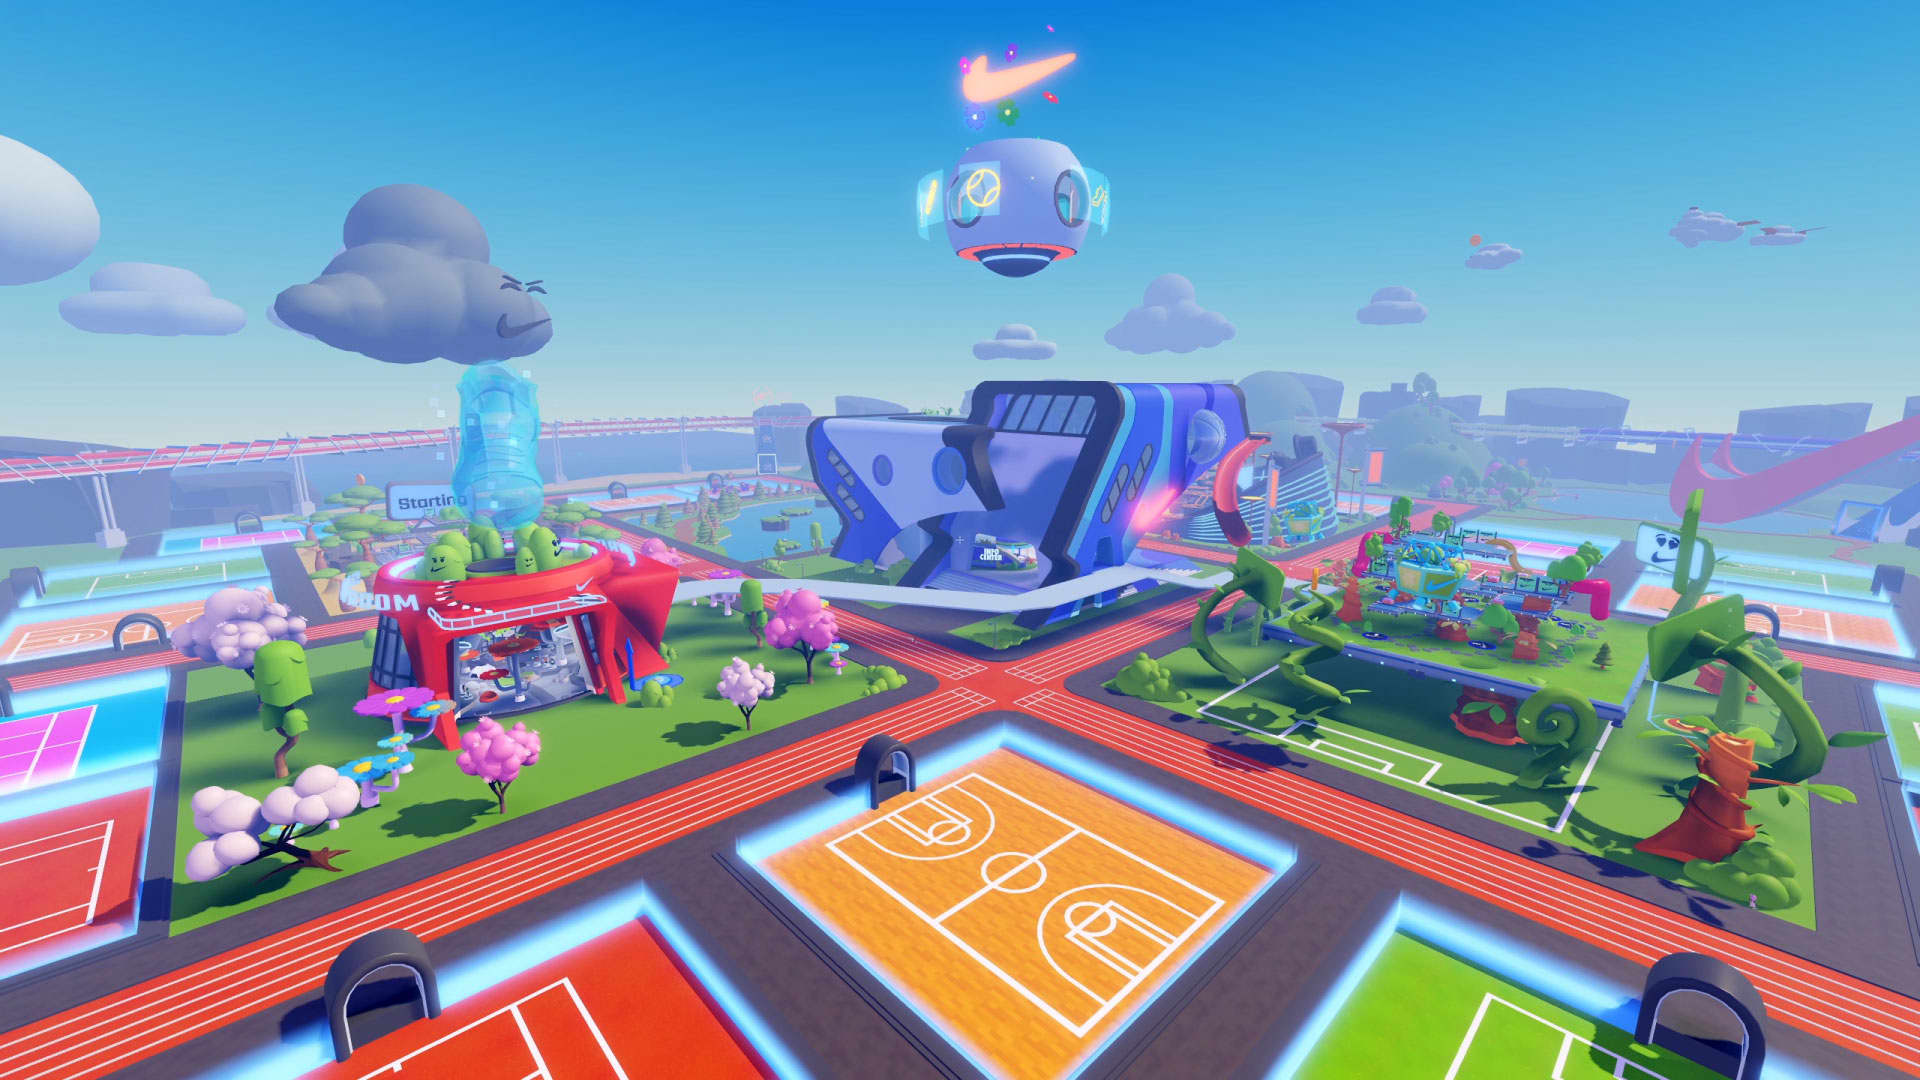 teams up with Roblox to create a virtual world